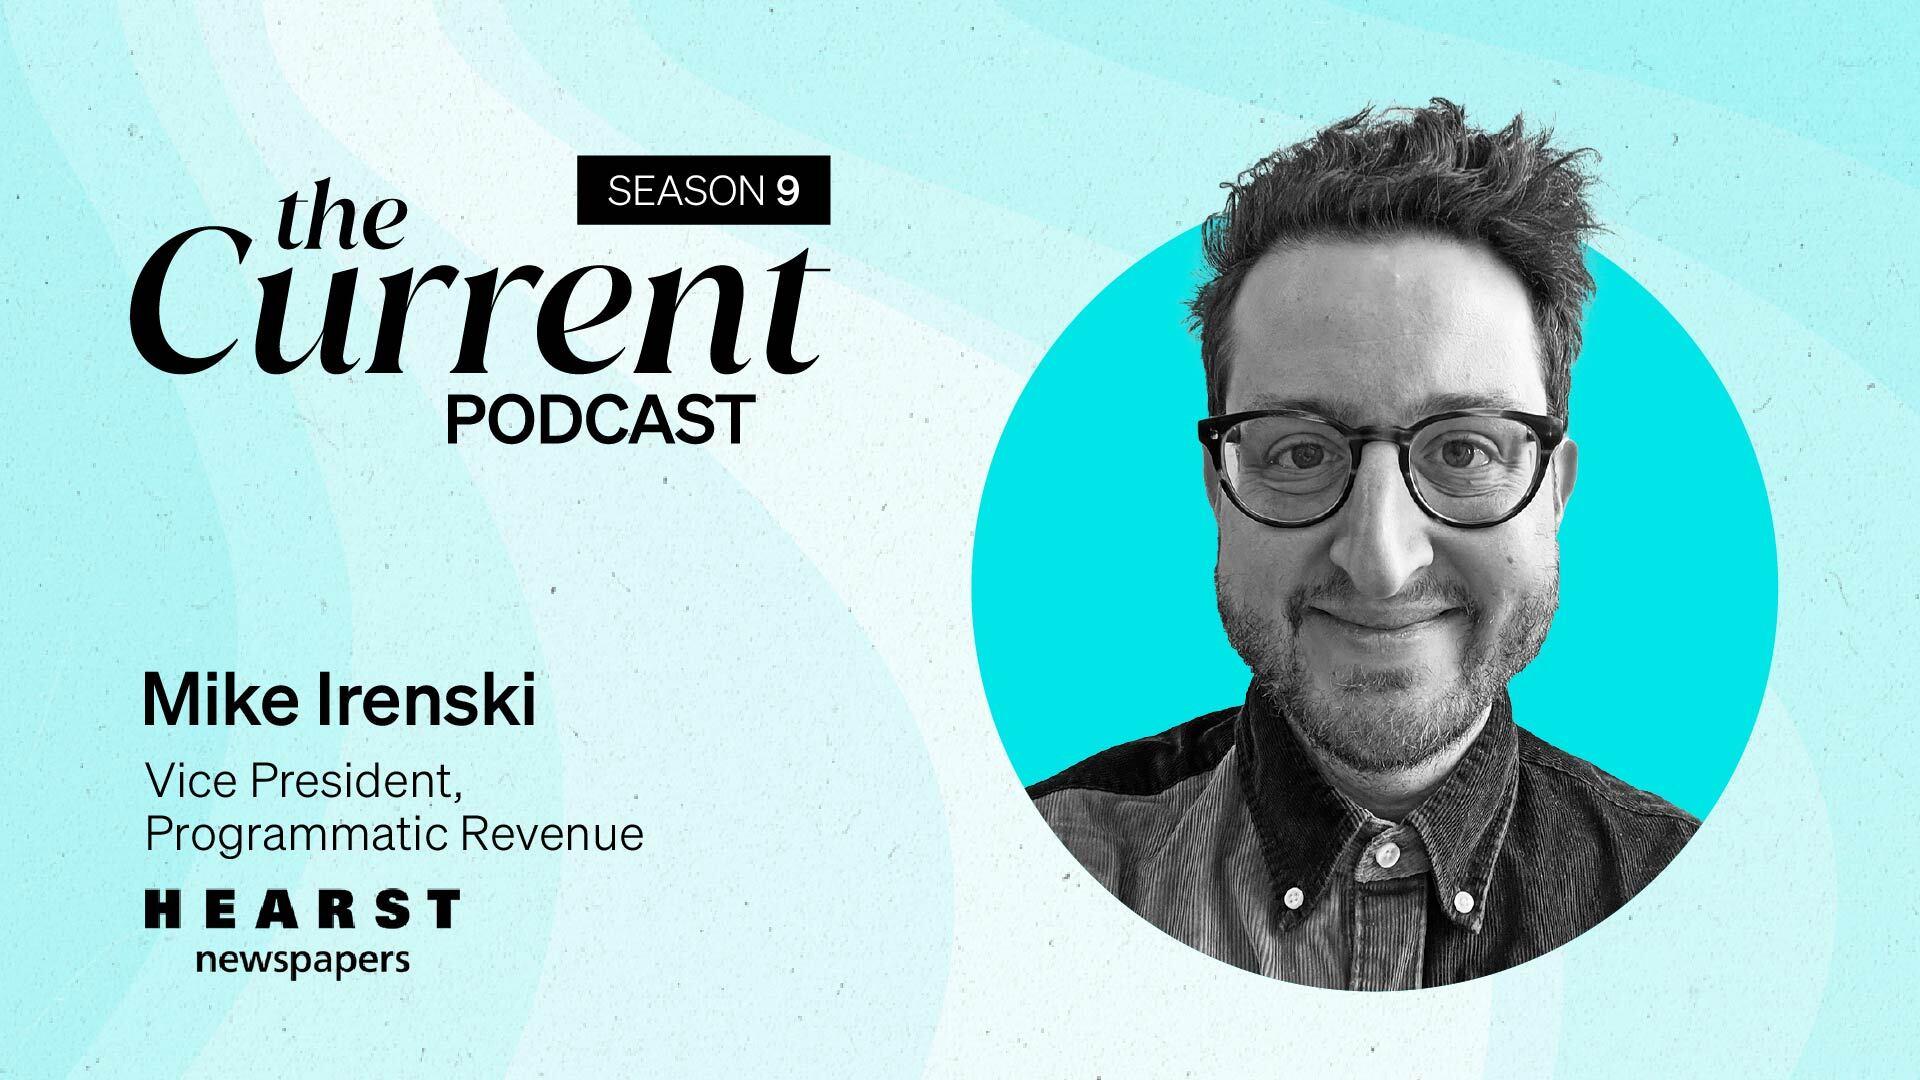 The Current Podcast, Season 9: Mike Irenski, Vice President, Programmatic Revenue, Hearst Newspapers.